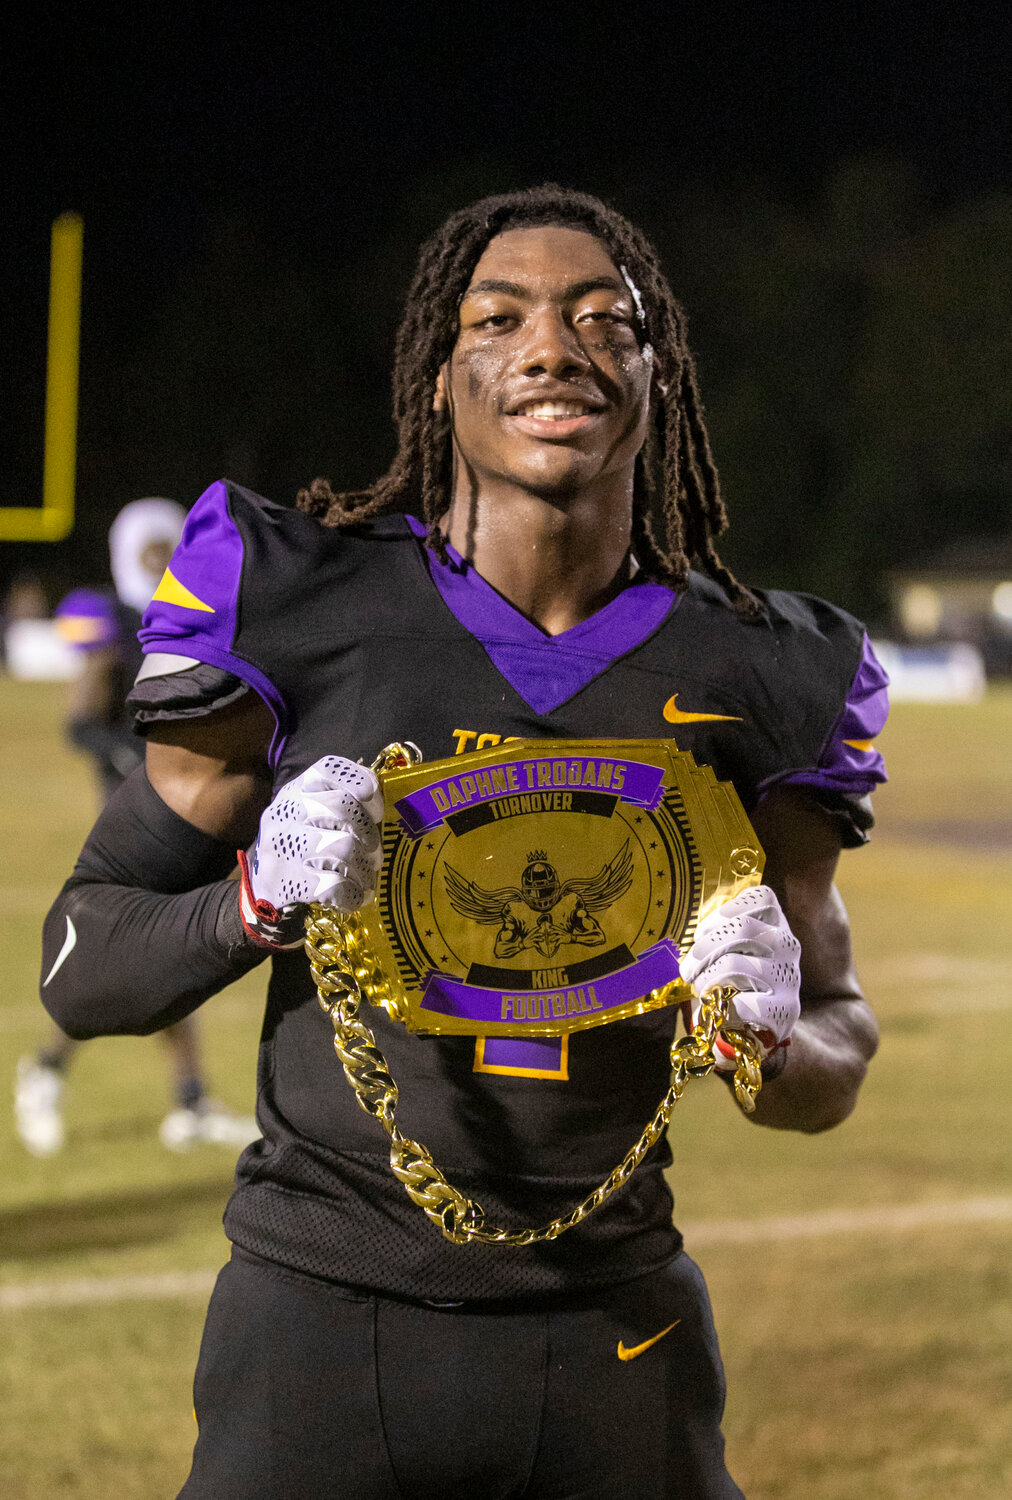 Cayden Williams celebrates a 57-35 win over the Foley Lions with the Daphne Trojans’ turnover belt after he supplied a pick-six to the defensive efforts that helped shut down an explosive offense. Williams’ assignment was to cover Foley receiver and Auburn commit Perry Thompson man-to-man all game and head coach Kenny King said the linebacker delivered.